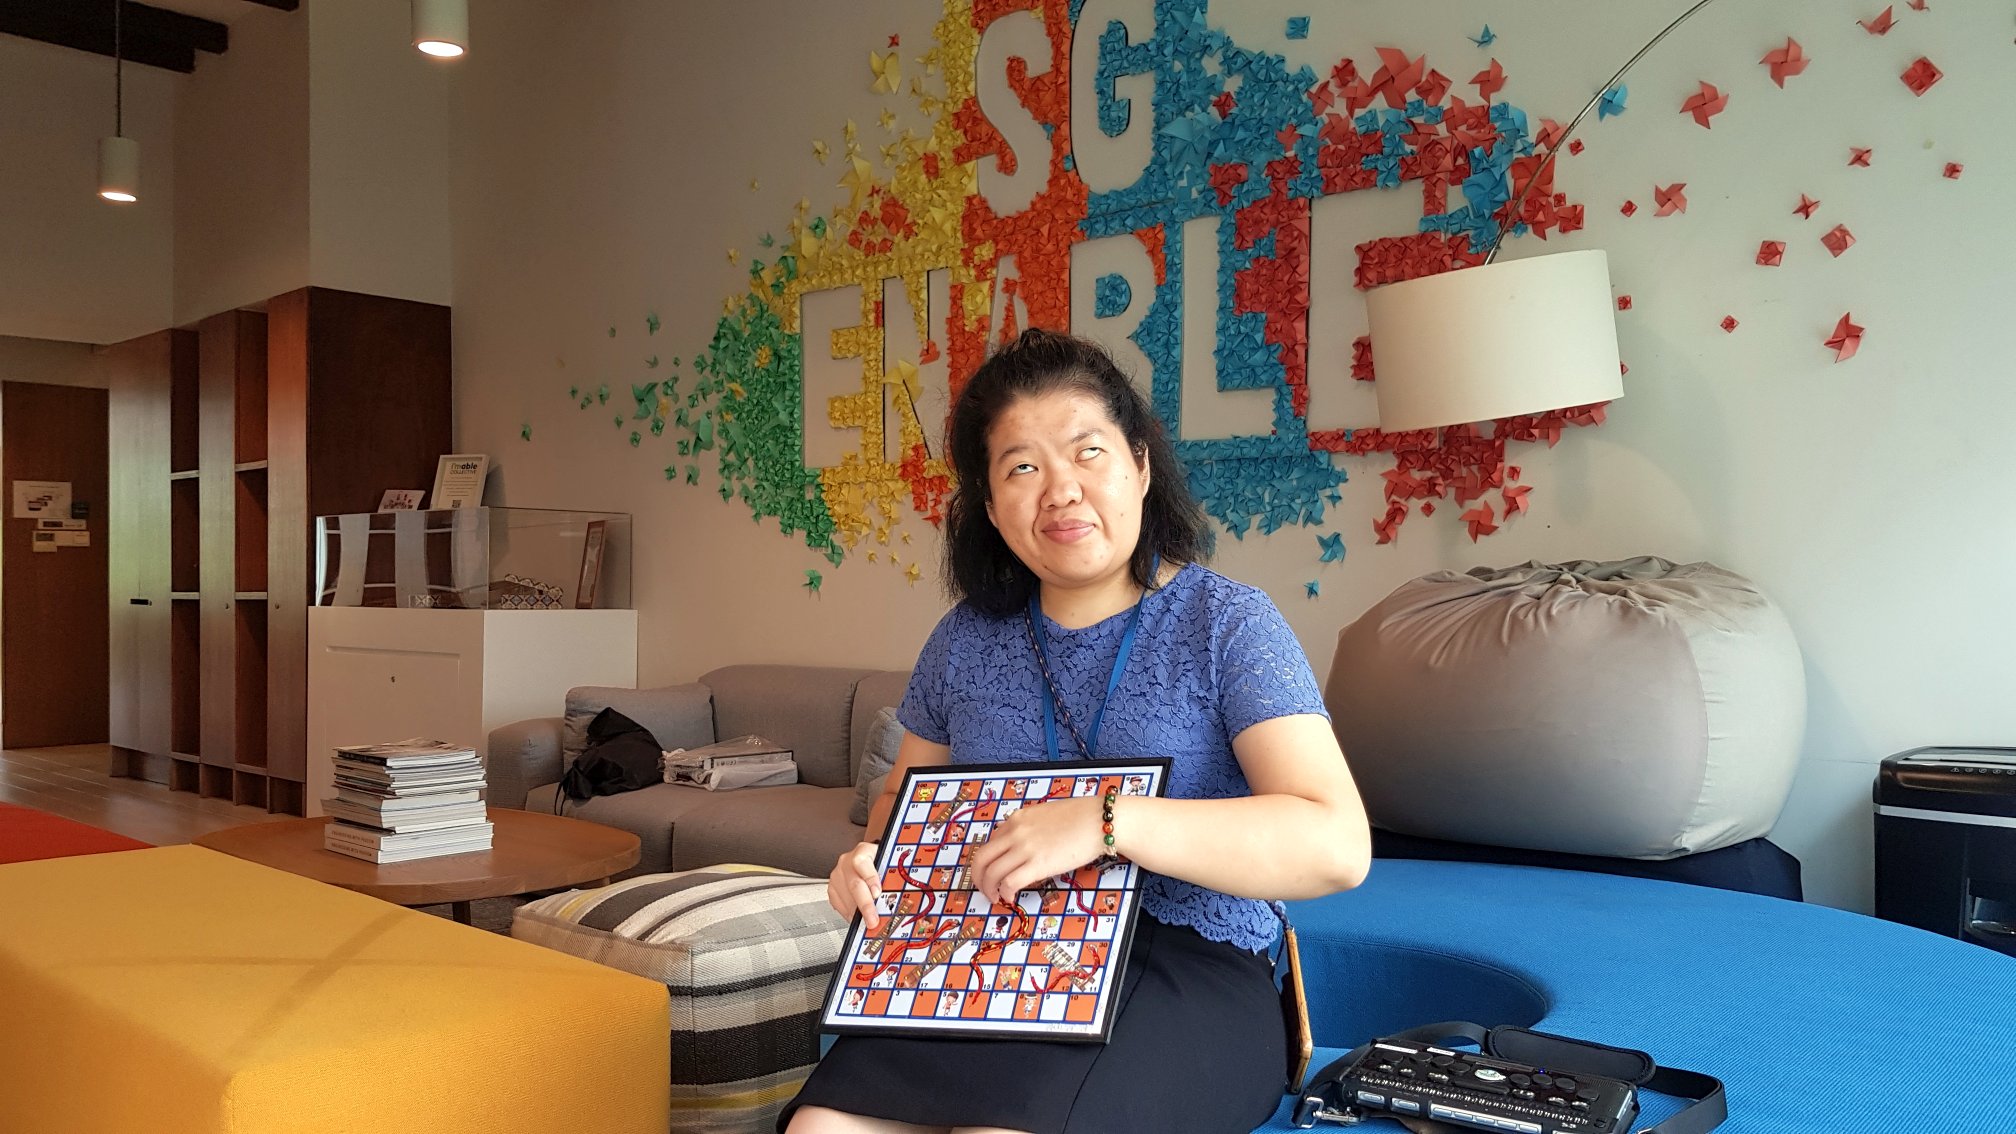 Siew Ling holding and touching the surface of the adapted Snakes and Ladders game.